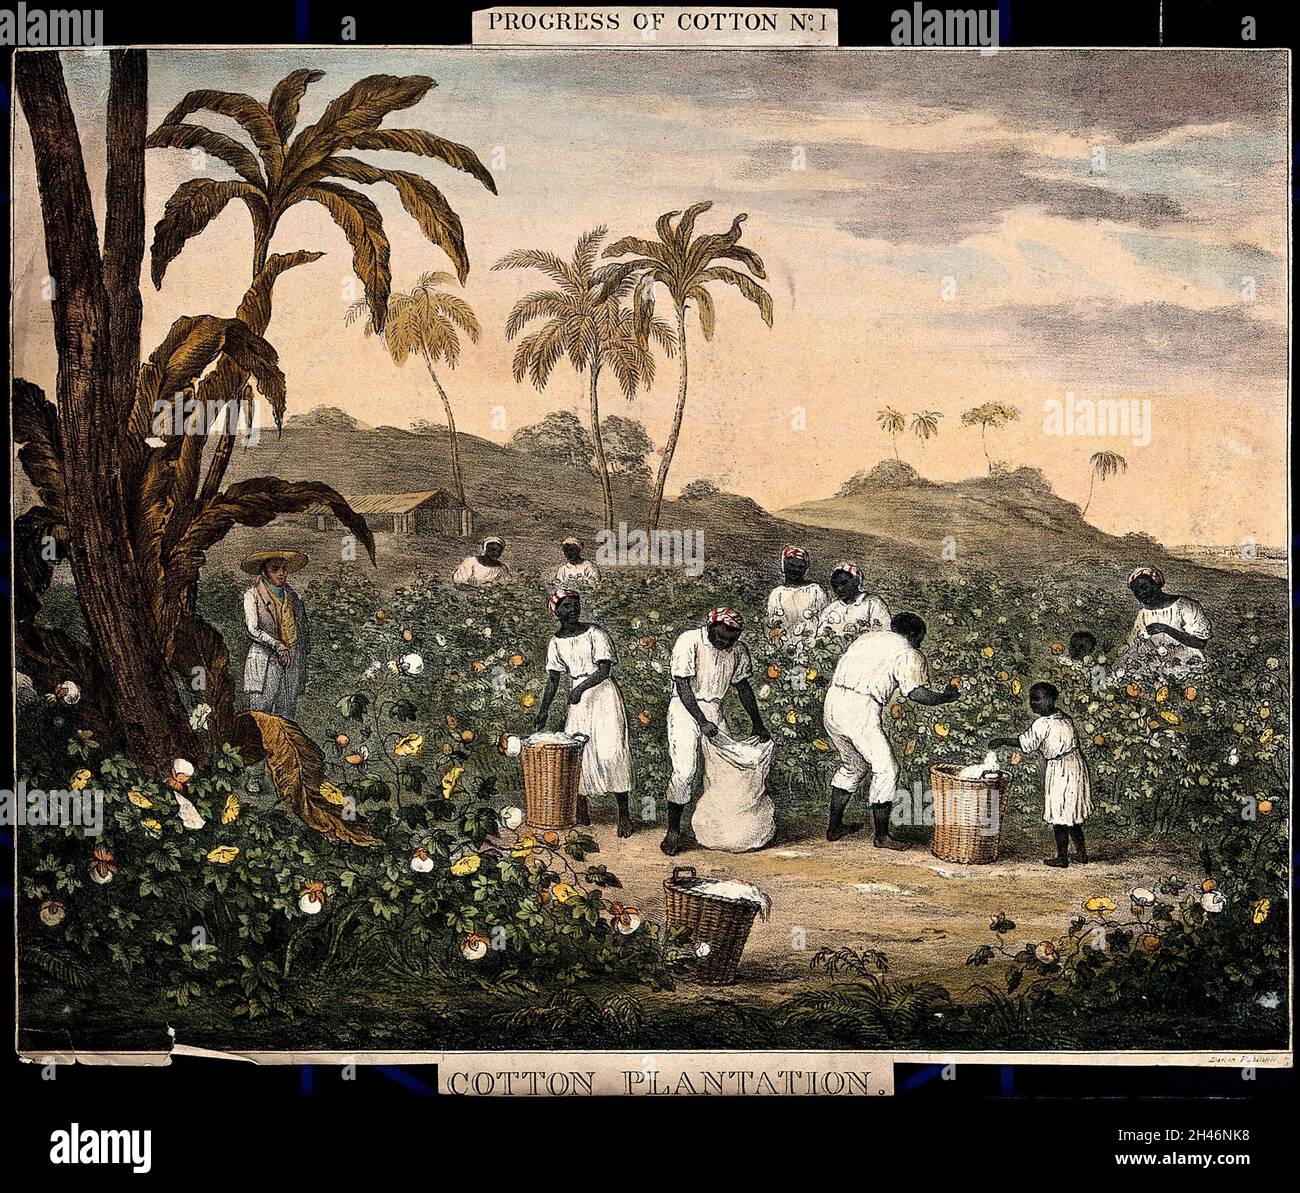 People with baskets and sacks pick cotton on a plantation. Coloured lithograph after J.R. Barfoot. Stock Photo